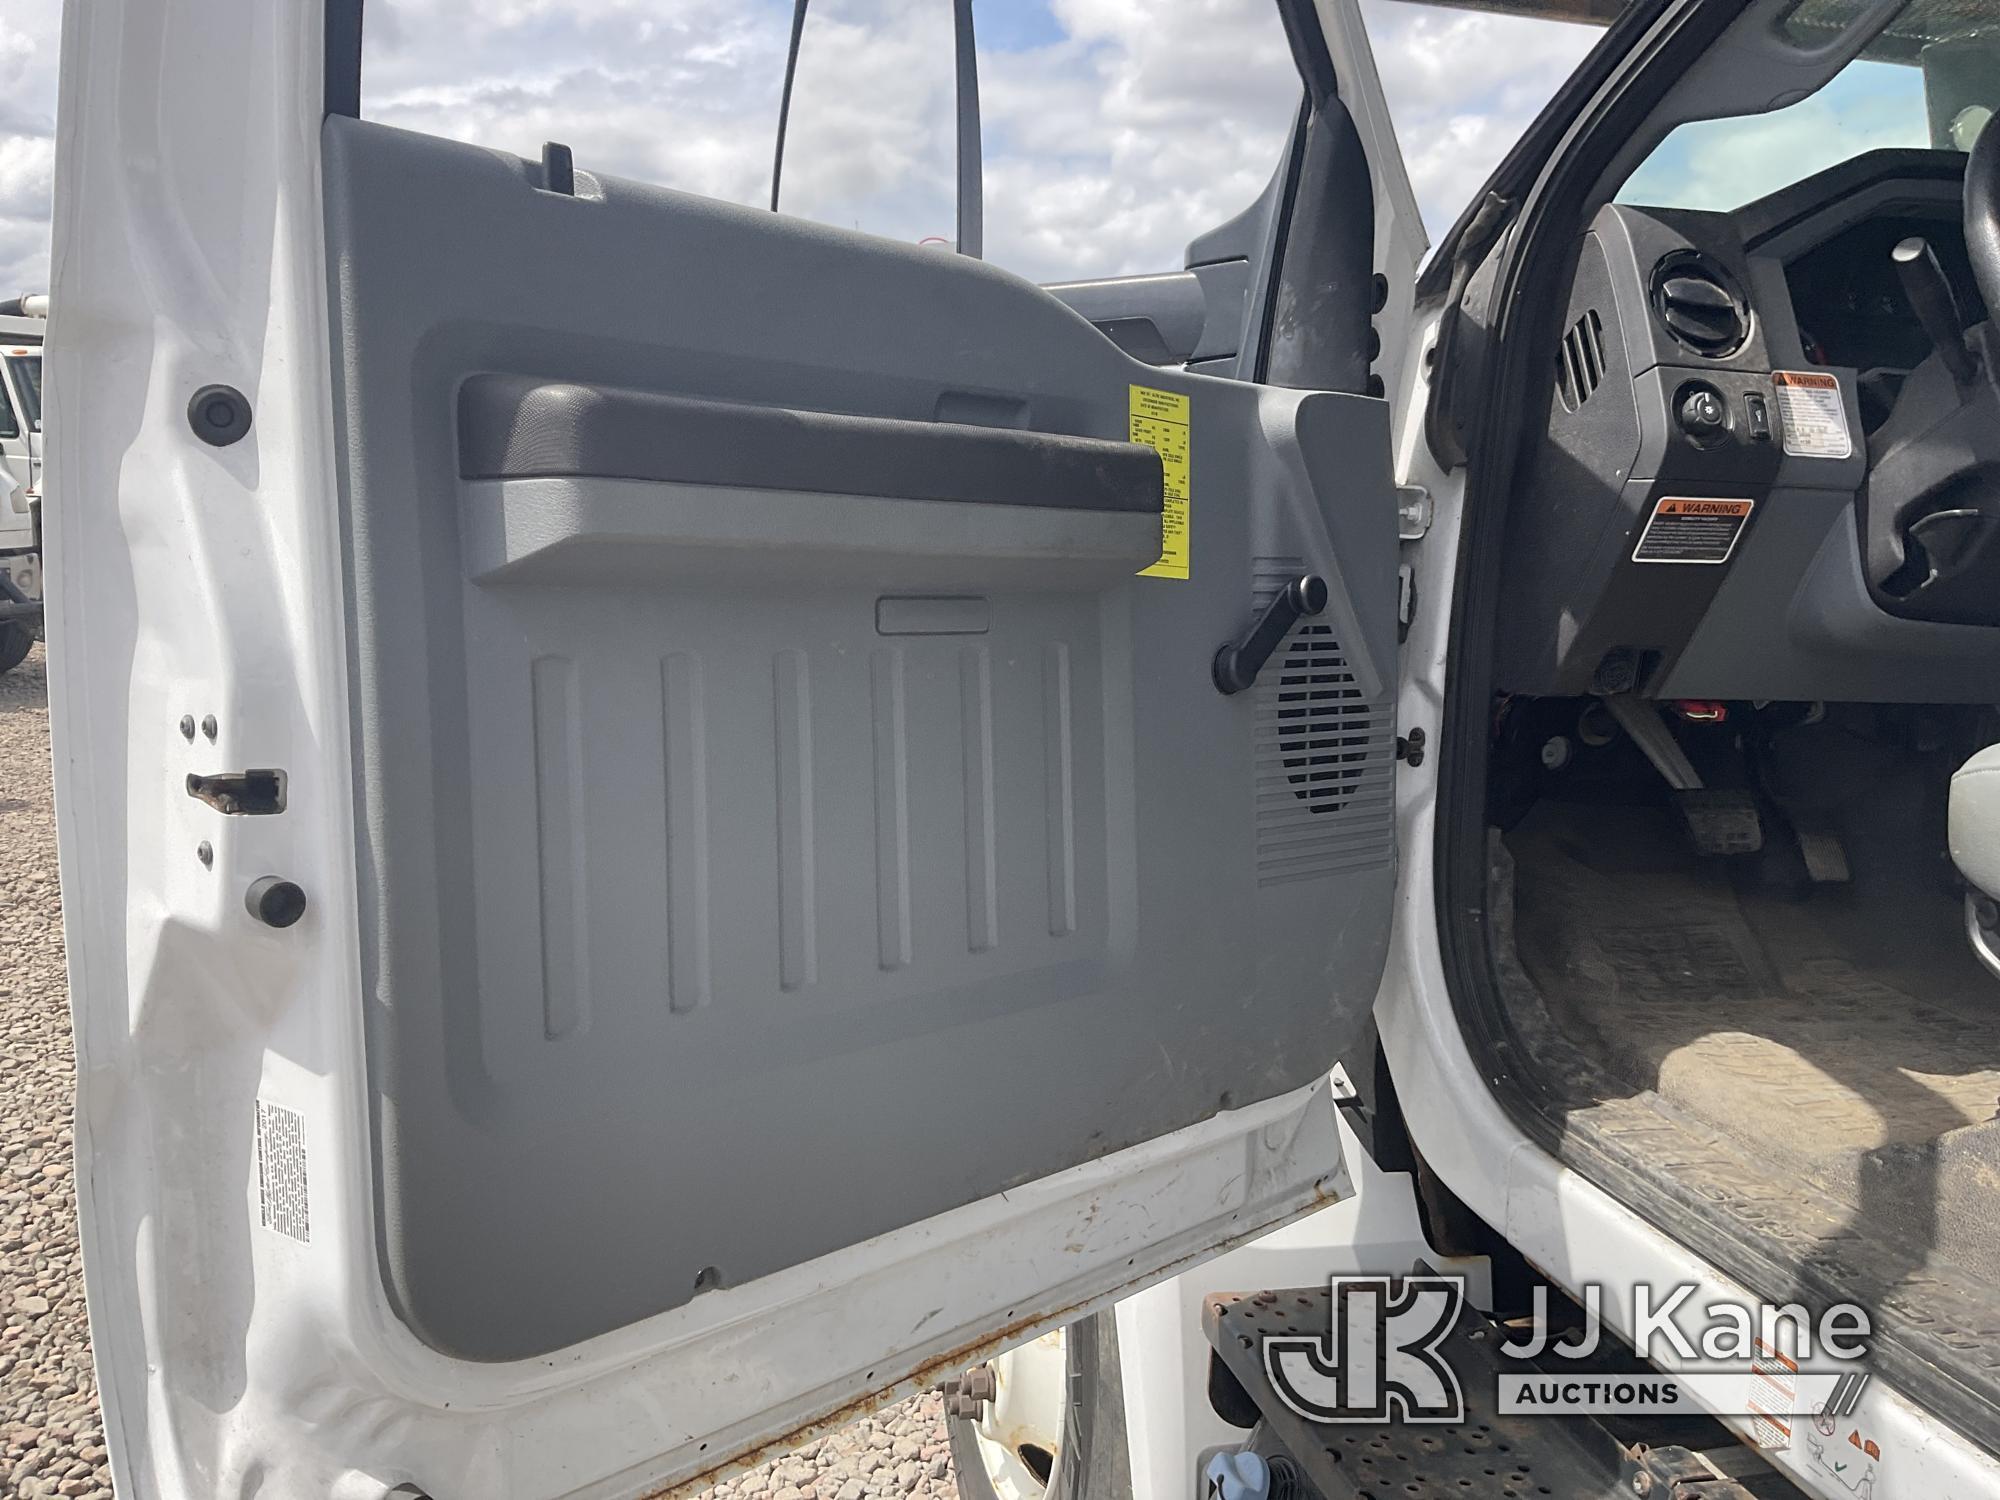 (Dixon, CA) Altec LR7-60E70, Over-Center Elevator Bucket Truck mounted behind cab on 2017 Ford F750